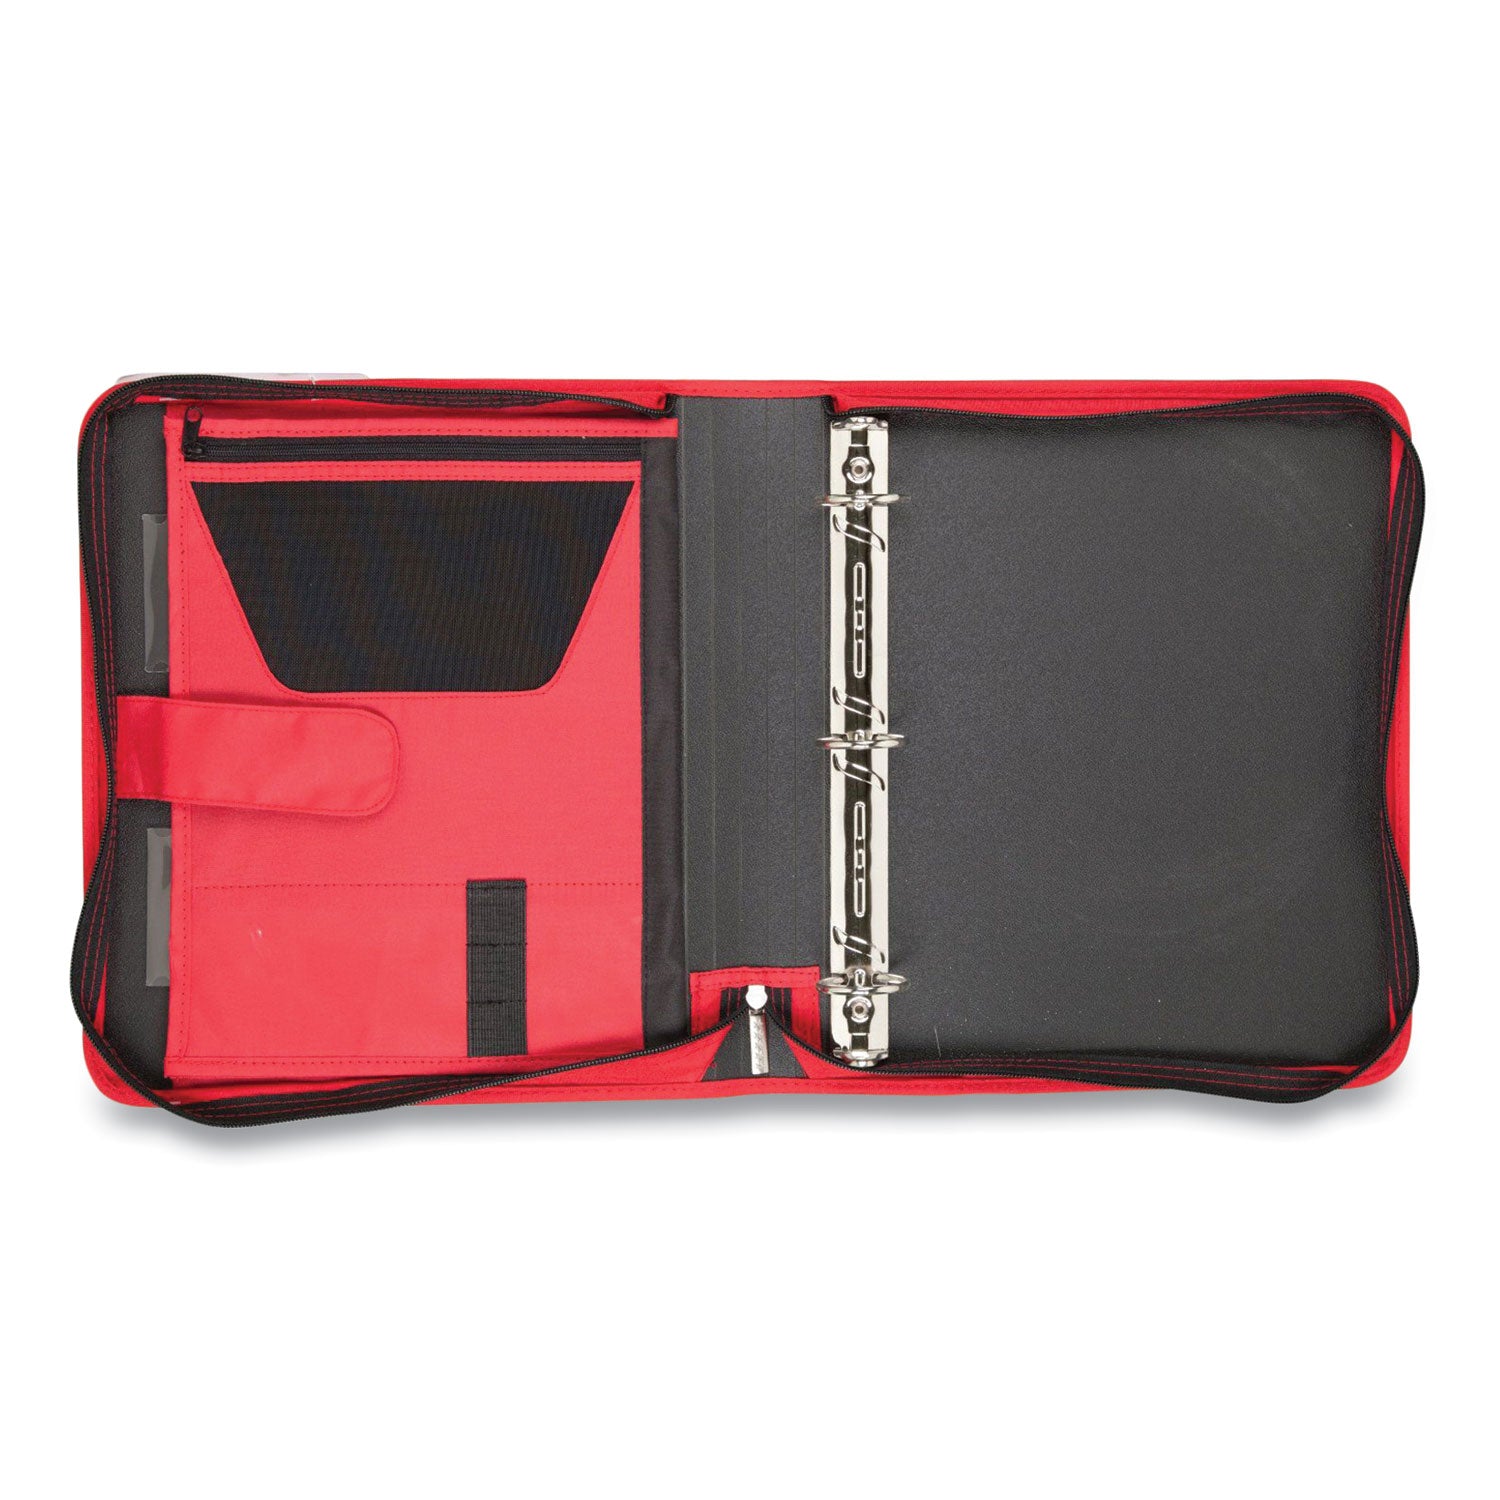 tech-zipper-binder-3-rings-15-capacity-11-x-85-red-black-accents_acc72206 - 2